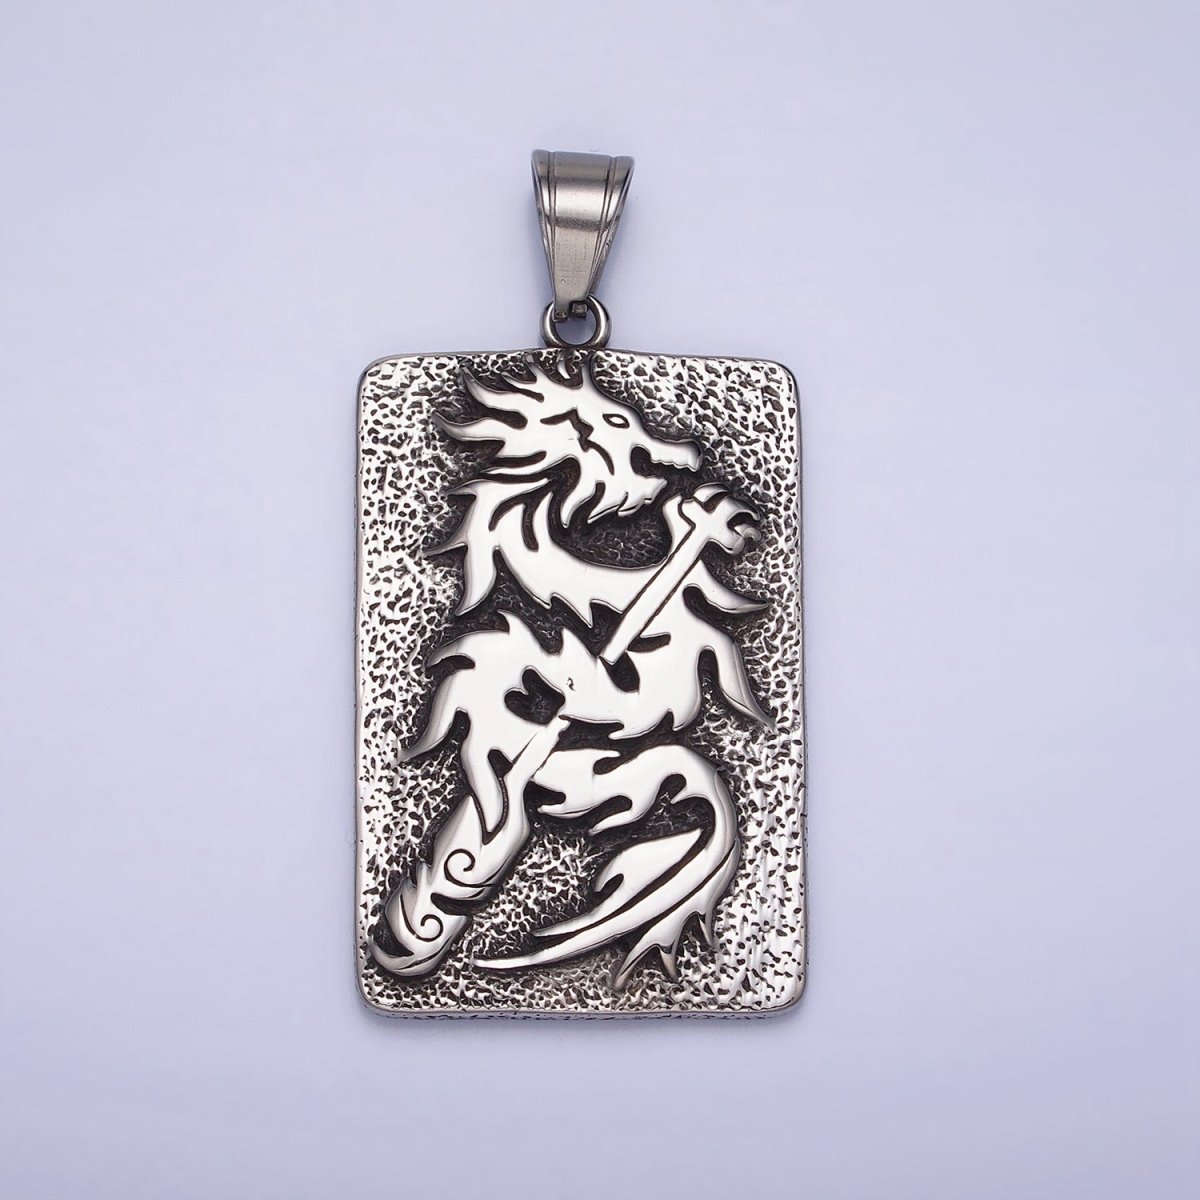 Stainless Steel Flamed Dragon Textured Rectangular Tag Silver, Gold Pendant | P1141 - DLUXCA